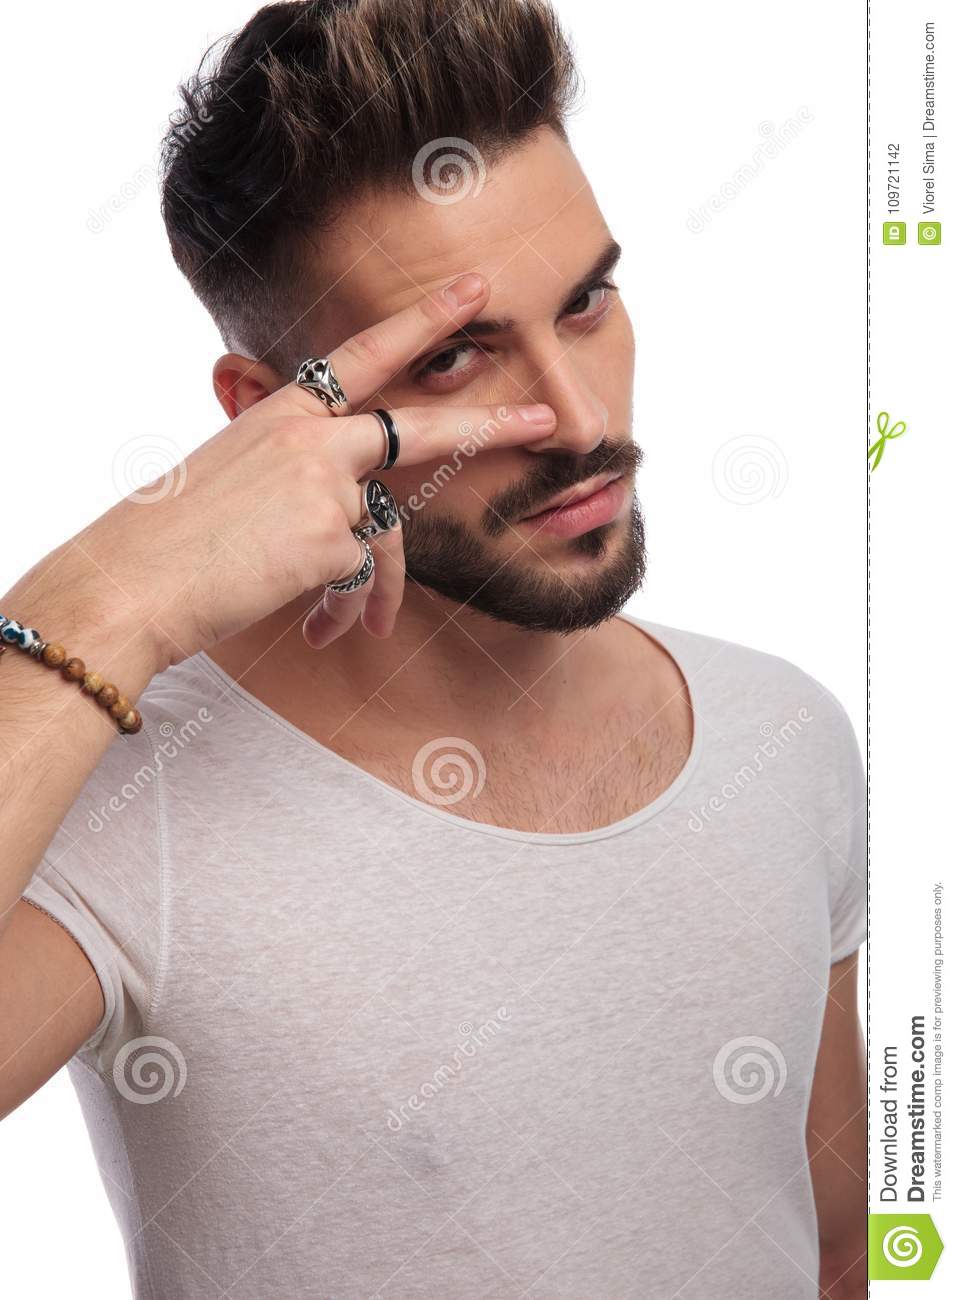 sexy-man-holding-fingers-his-eye-sexy-man-holding-fingers-his-eye-making-peace-sign-white-background-109721142.jpg